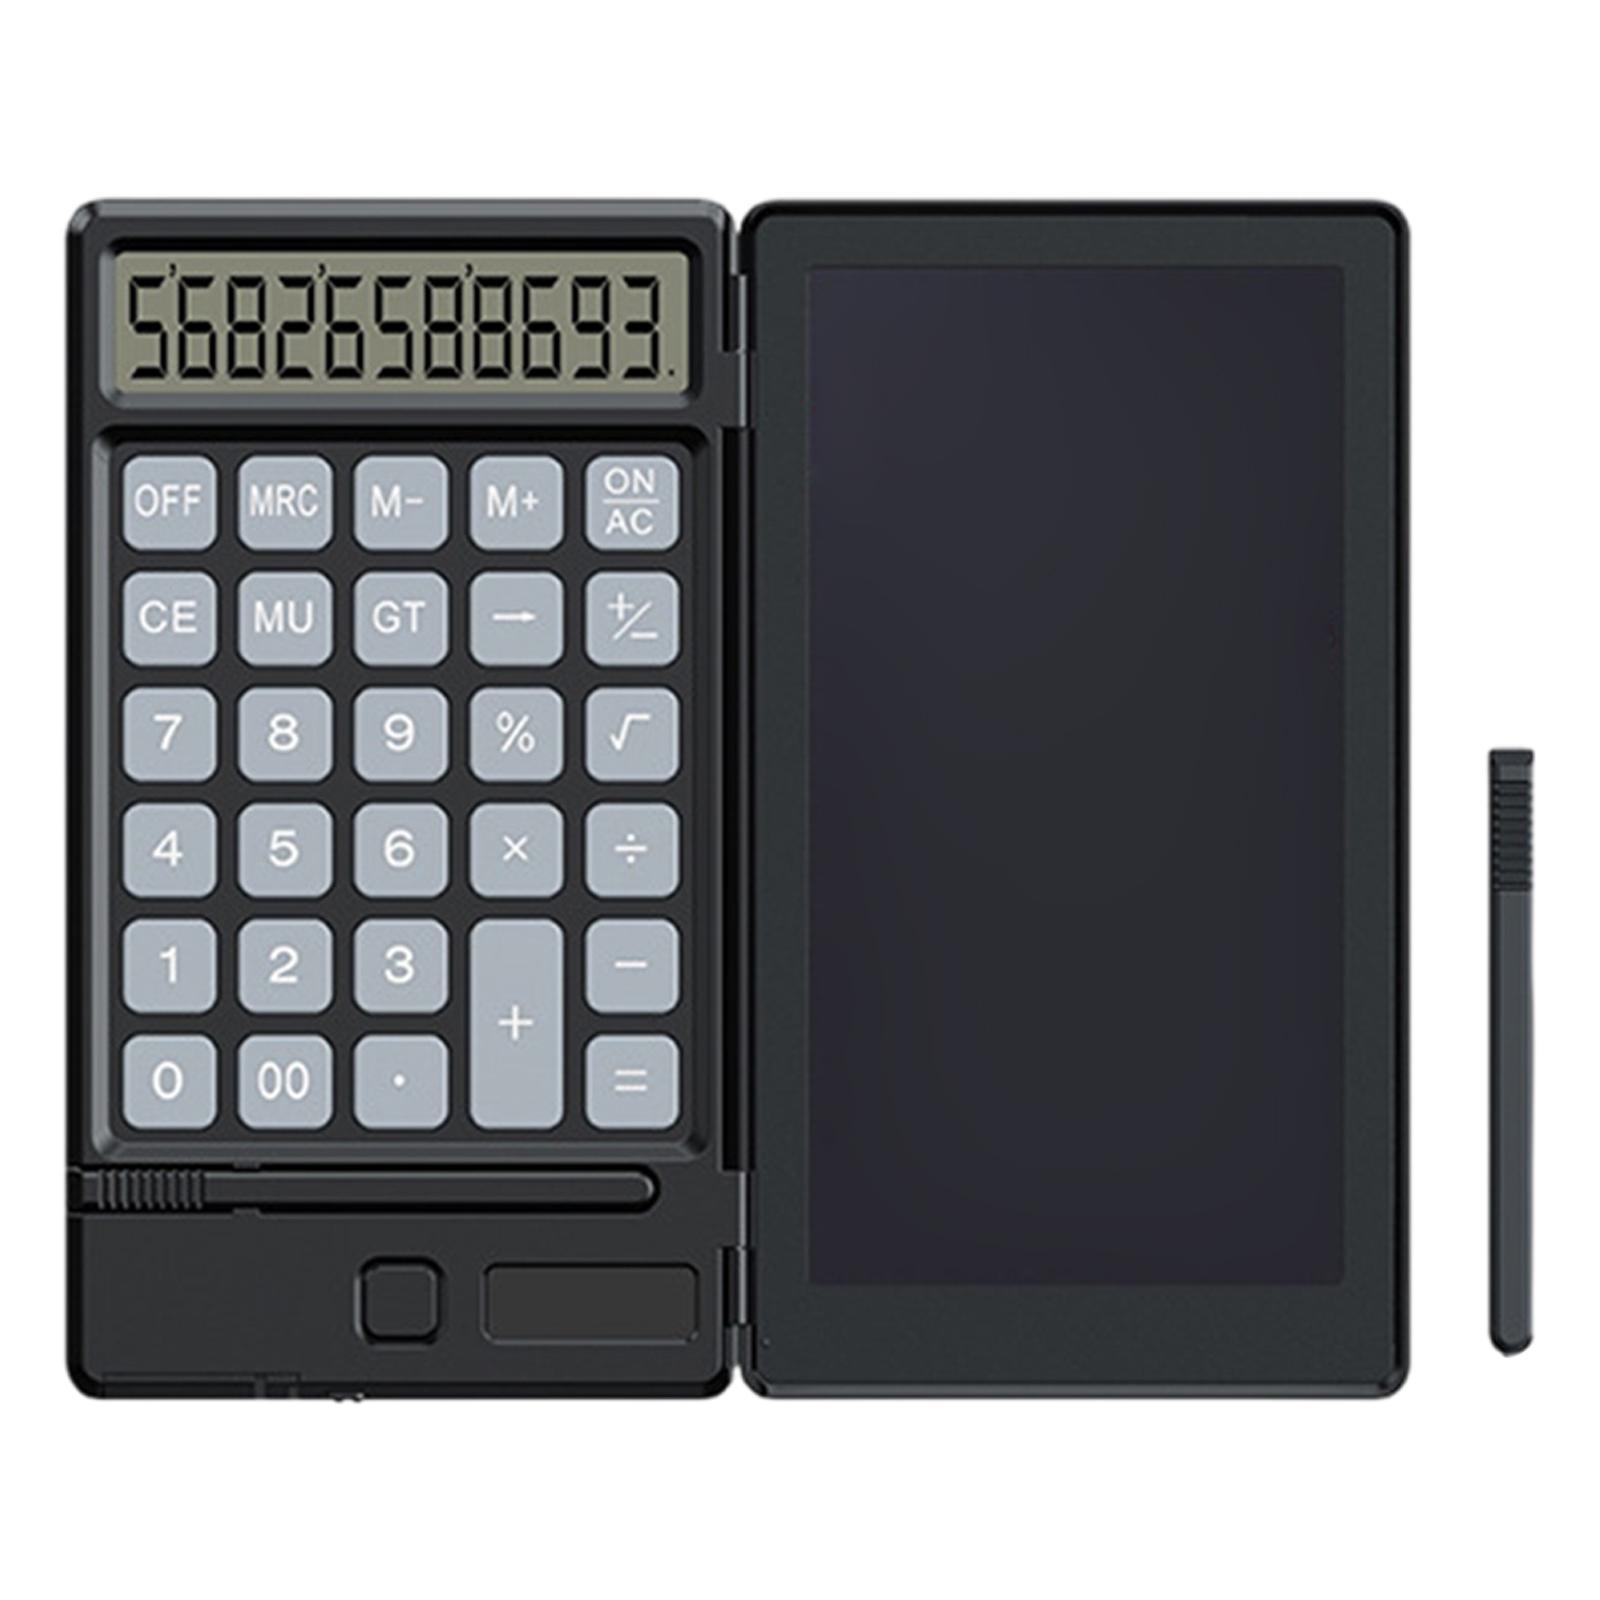 Calculator Writing Tablet LCD for Accounting Calculations